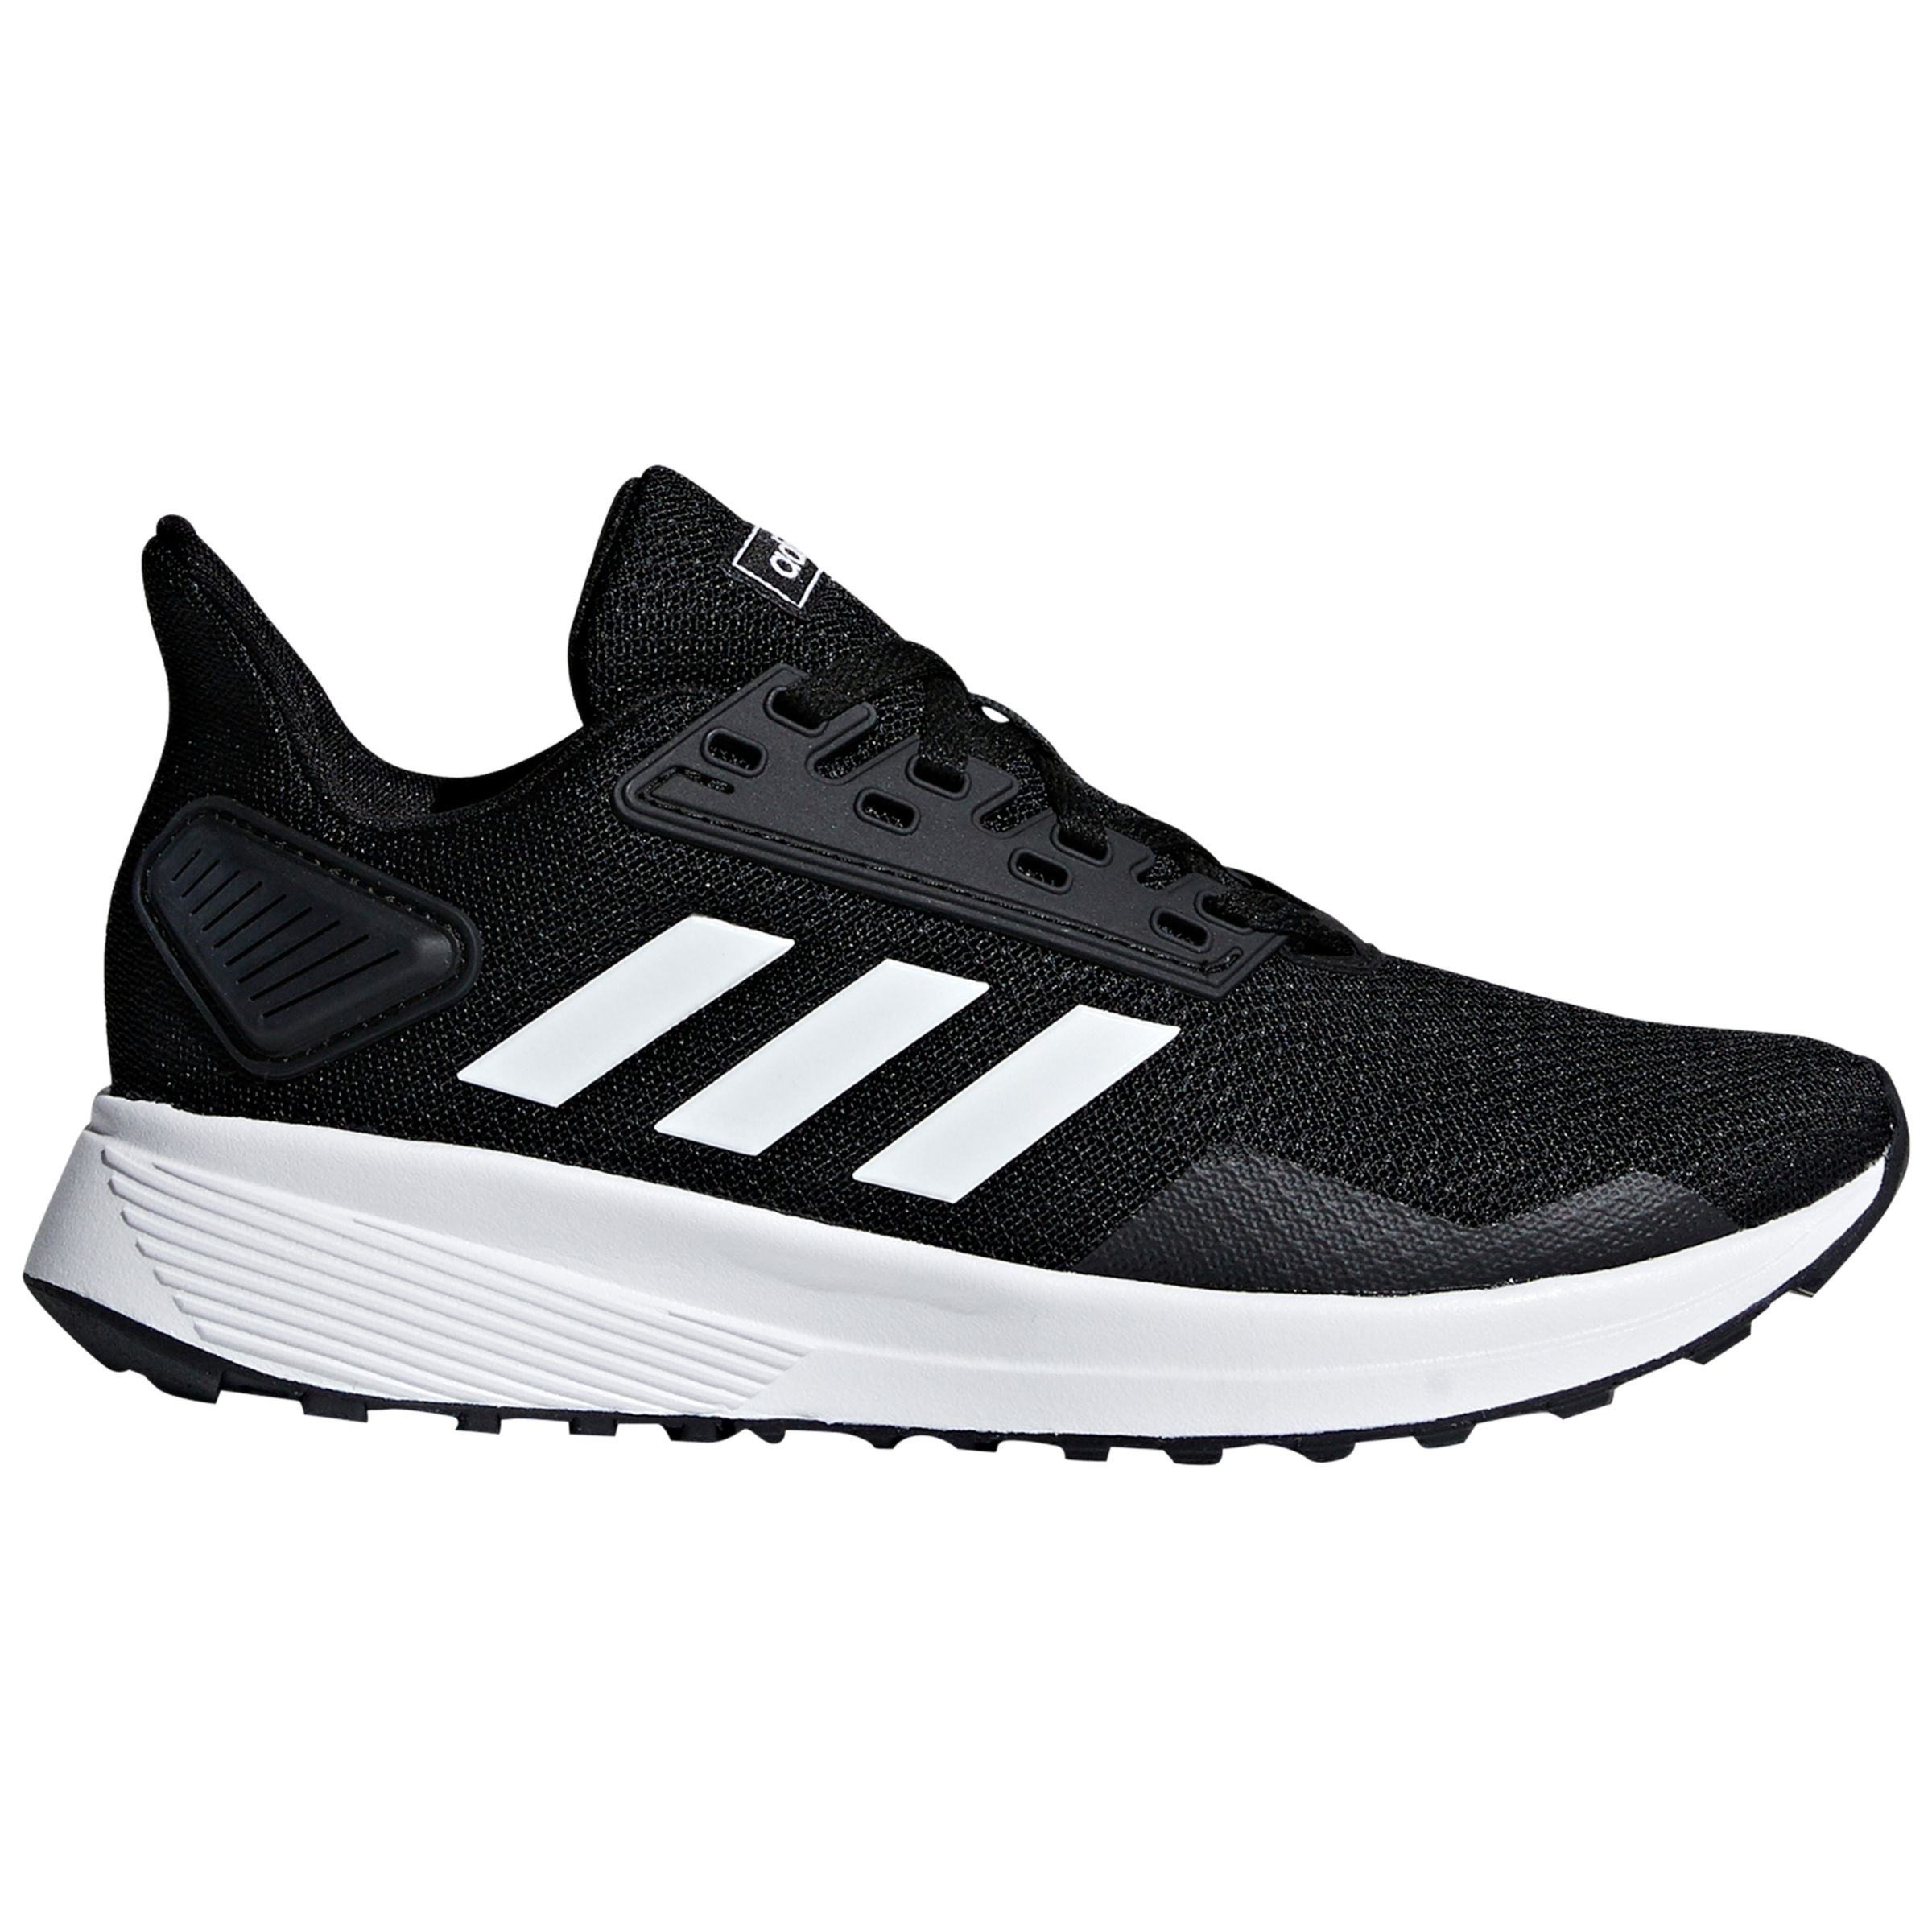 adidas Children's Duramo 9K Lace Up Sports Trainers at John Lewis ...